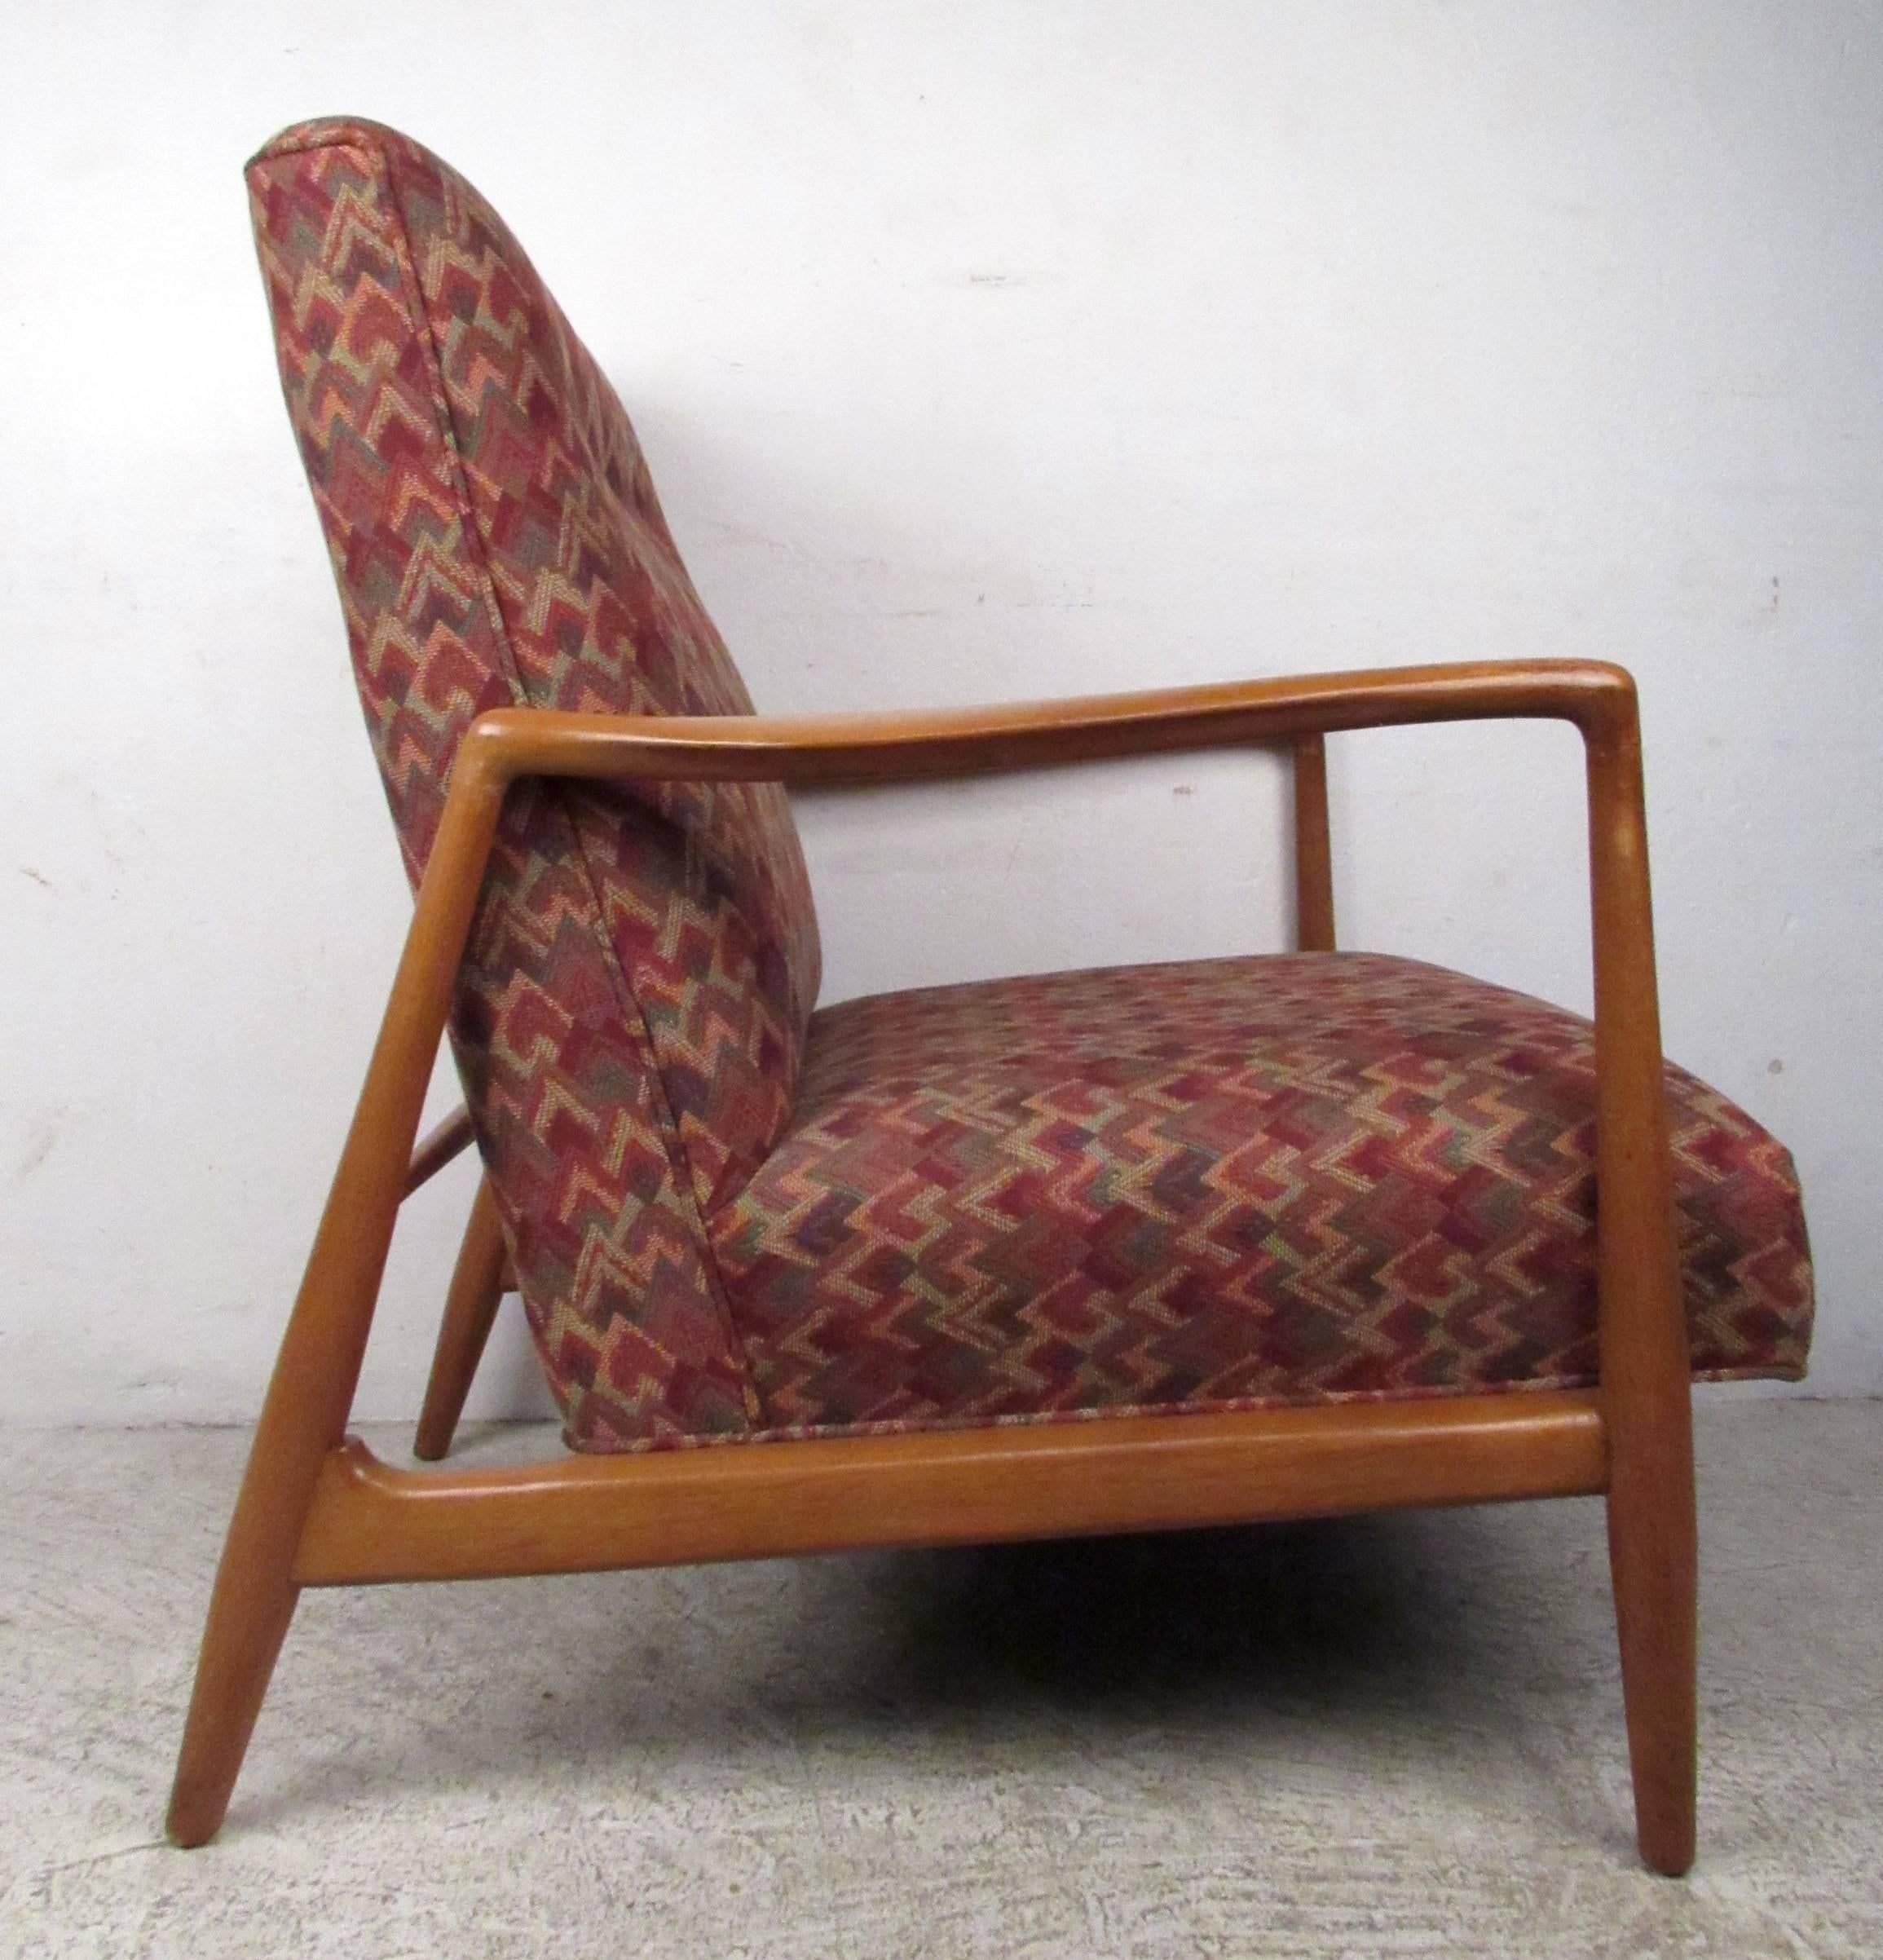 Vintage-modern lounge chair featuring sculpted legs and armrests with upholstered seat and back, designed in the manner of Adrian Pearsall.

Please confirm item location NY or NJ with dealer.